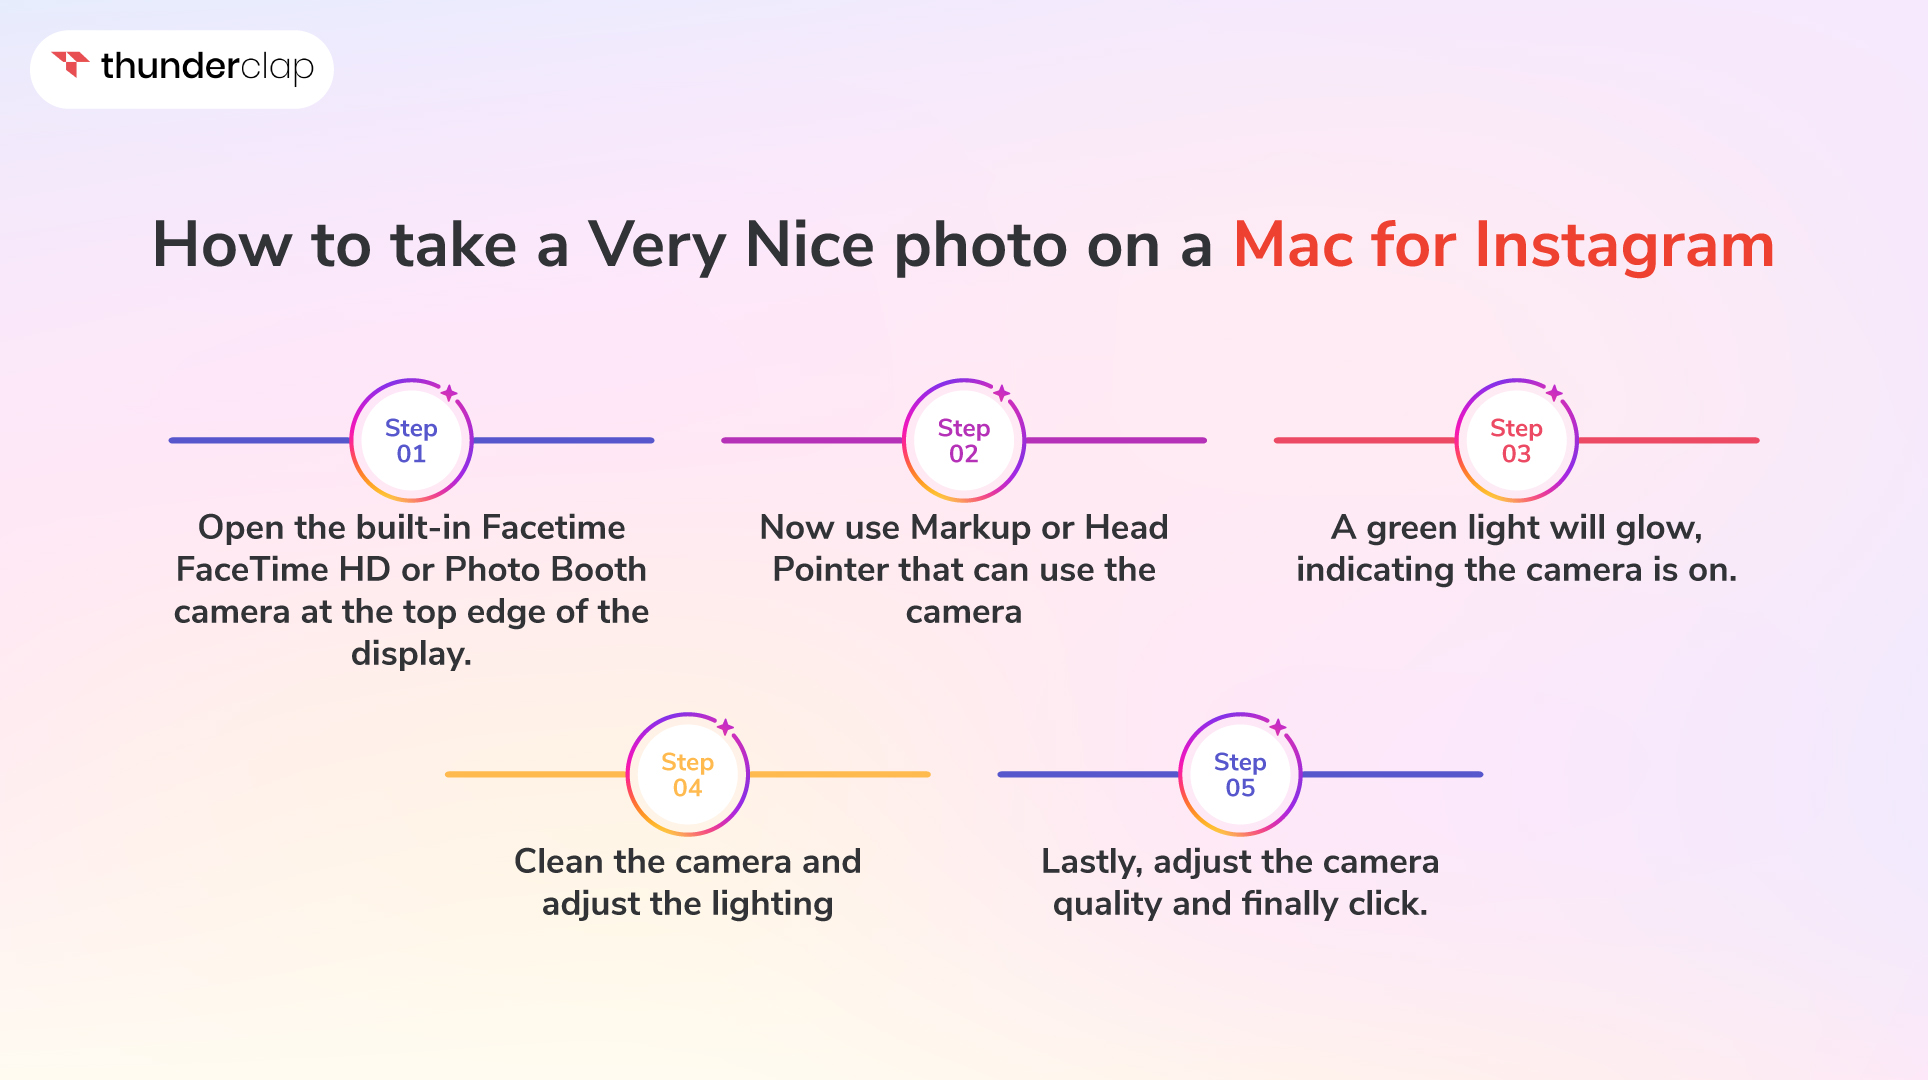 How to take a Very Nice photo on a Mac for Instagram